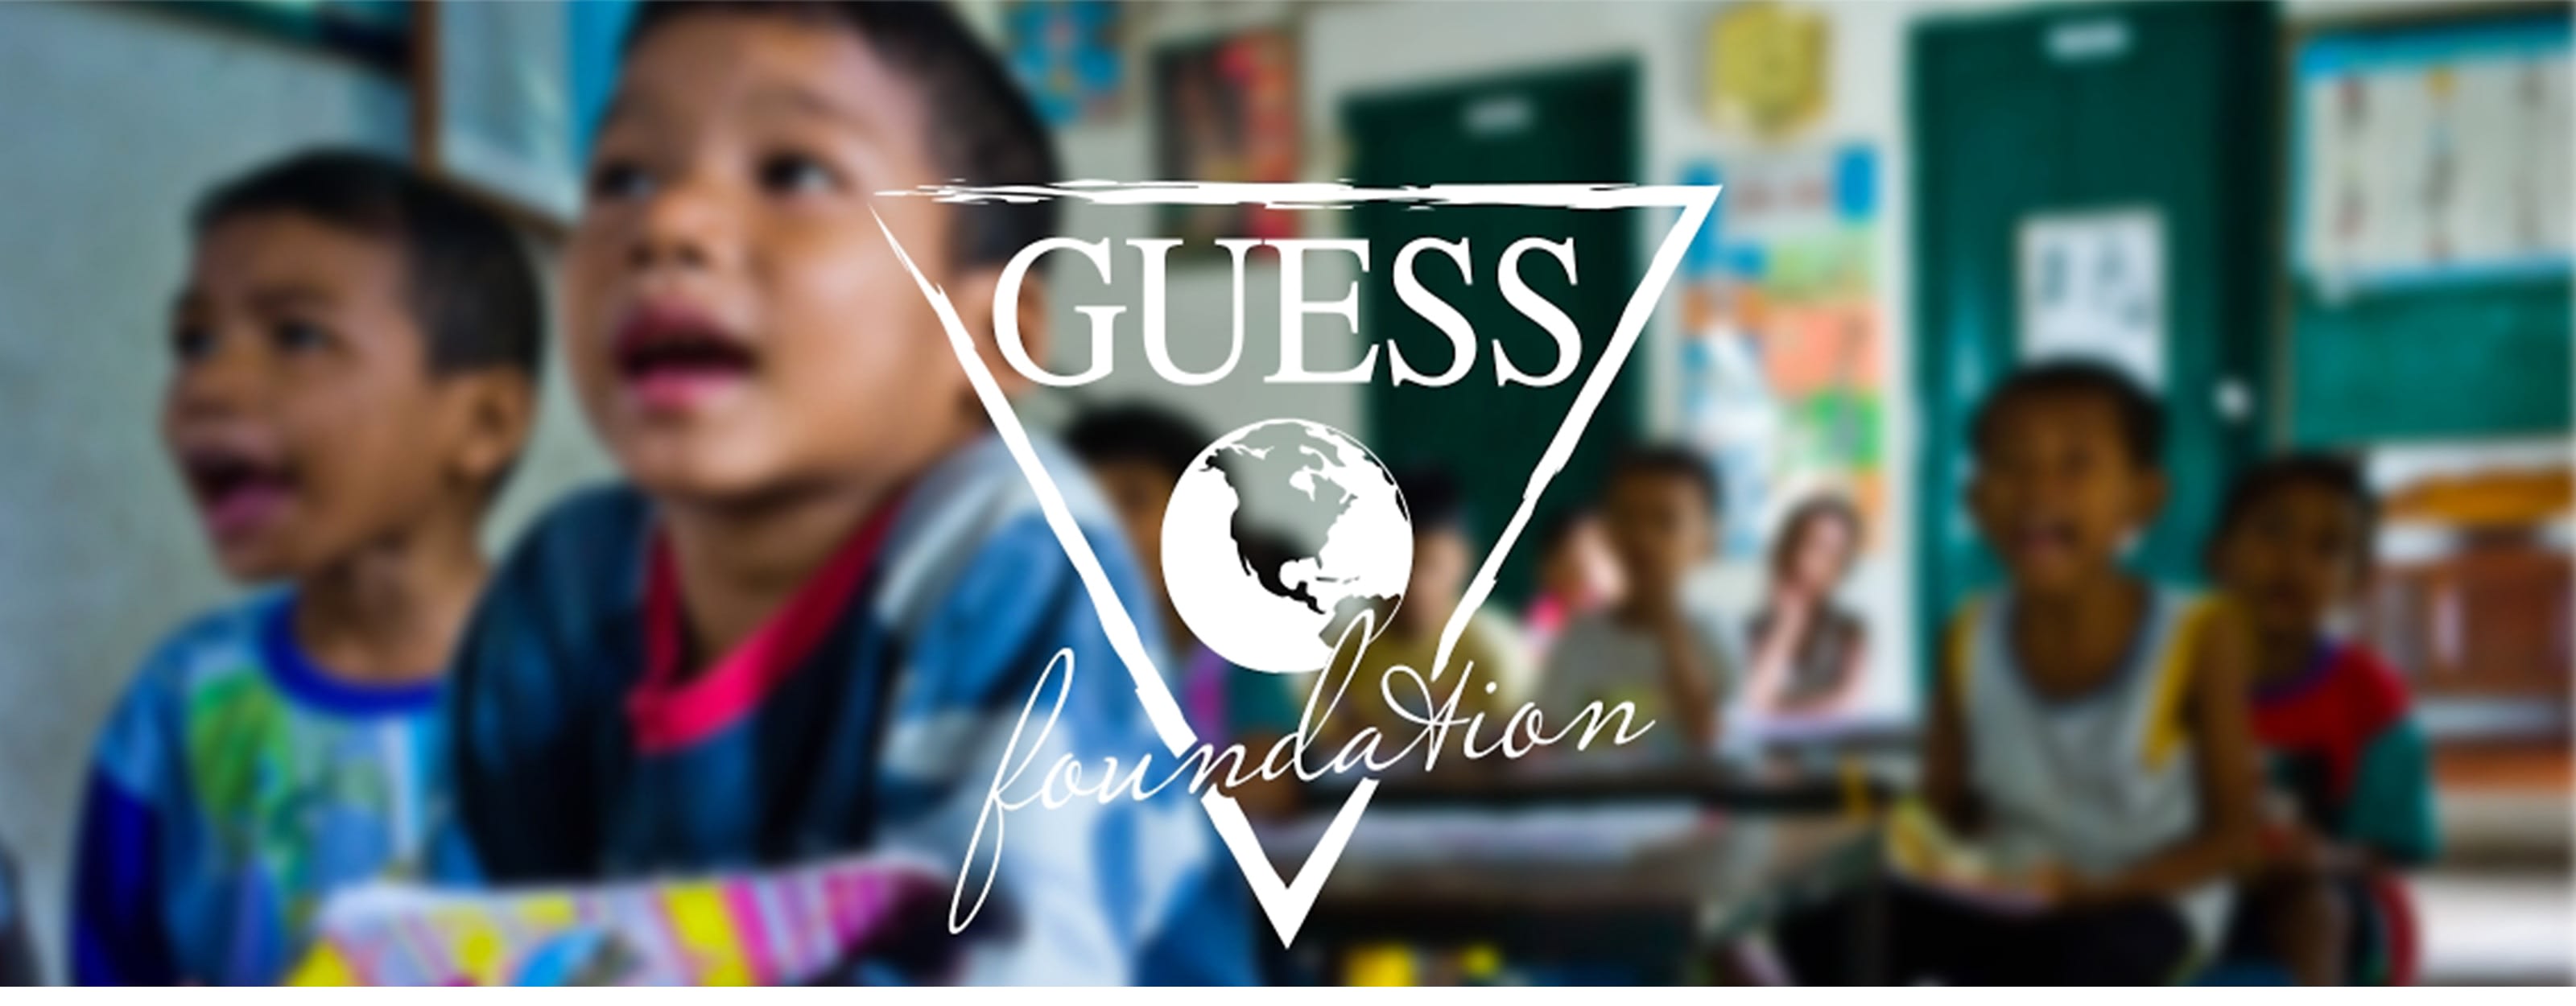 GUESS Foundation